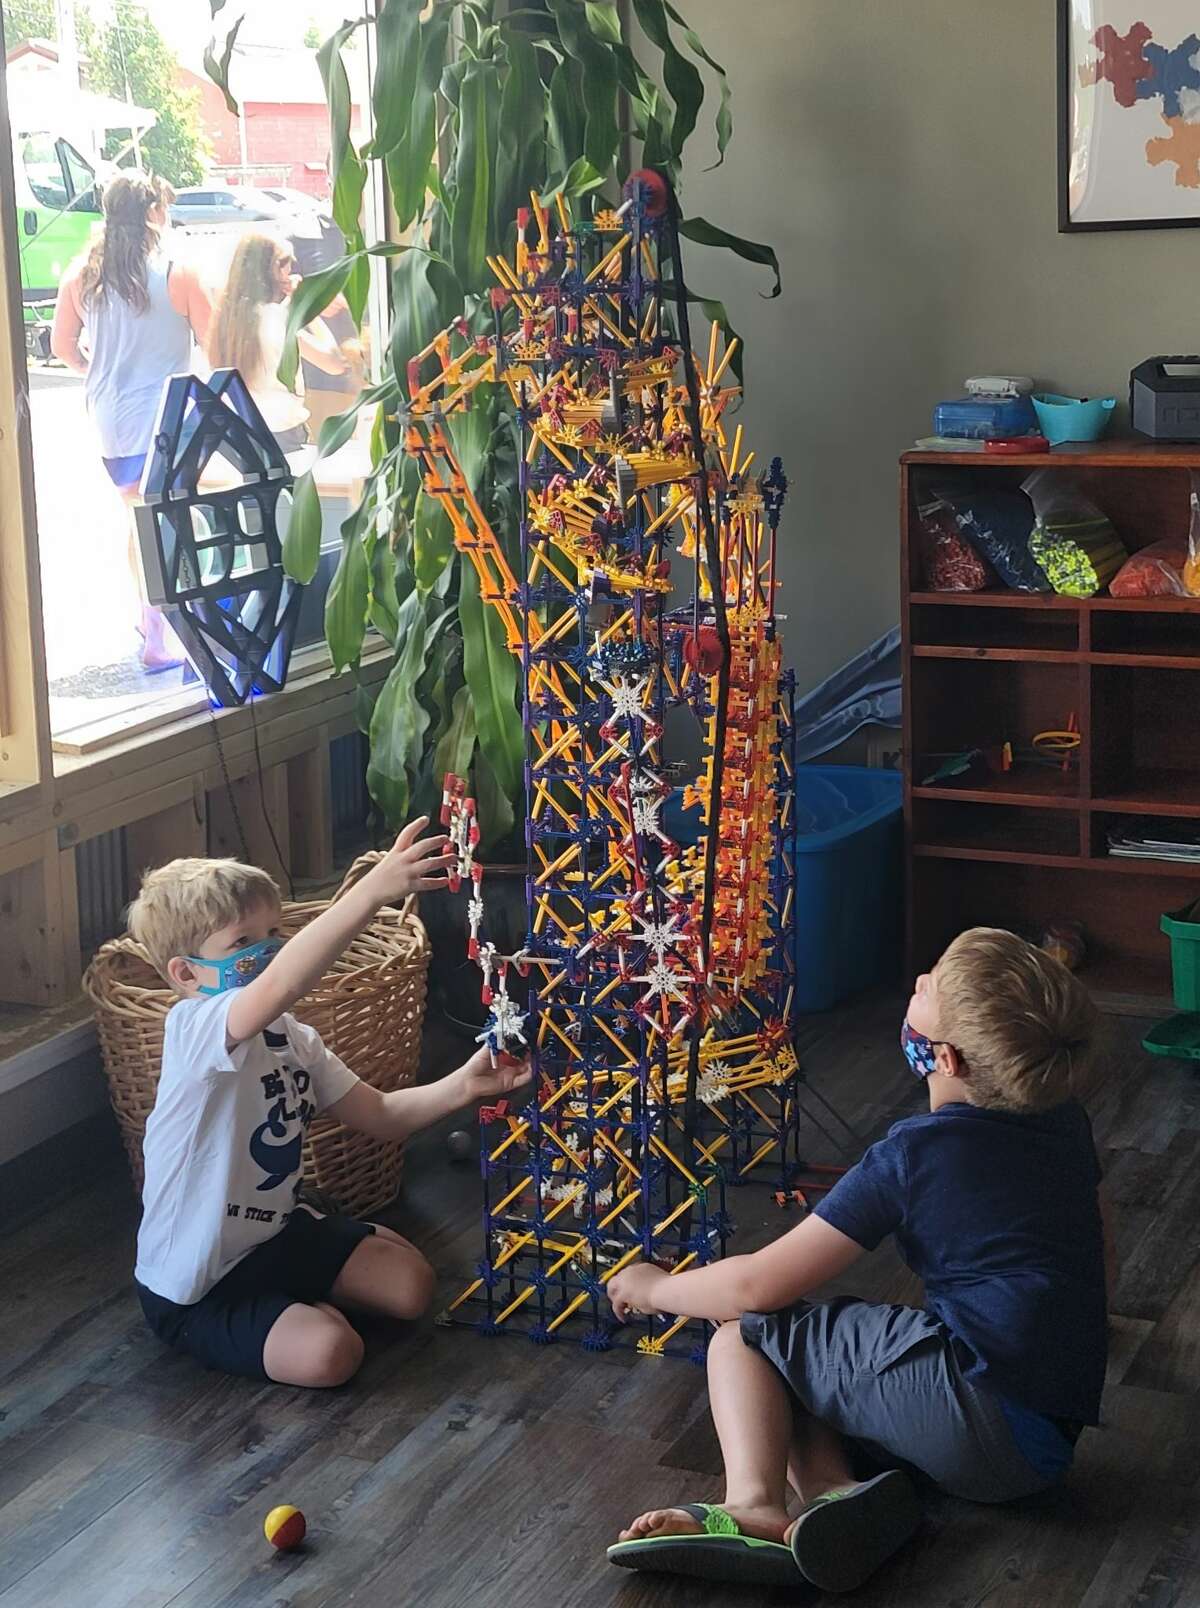 Children work on building a tower with an erector set type of building toy. 